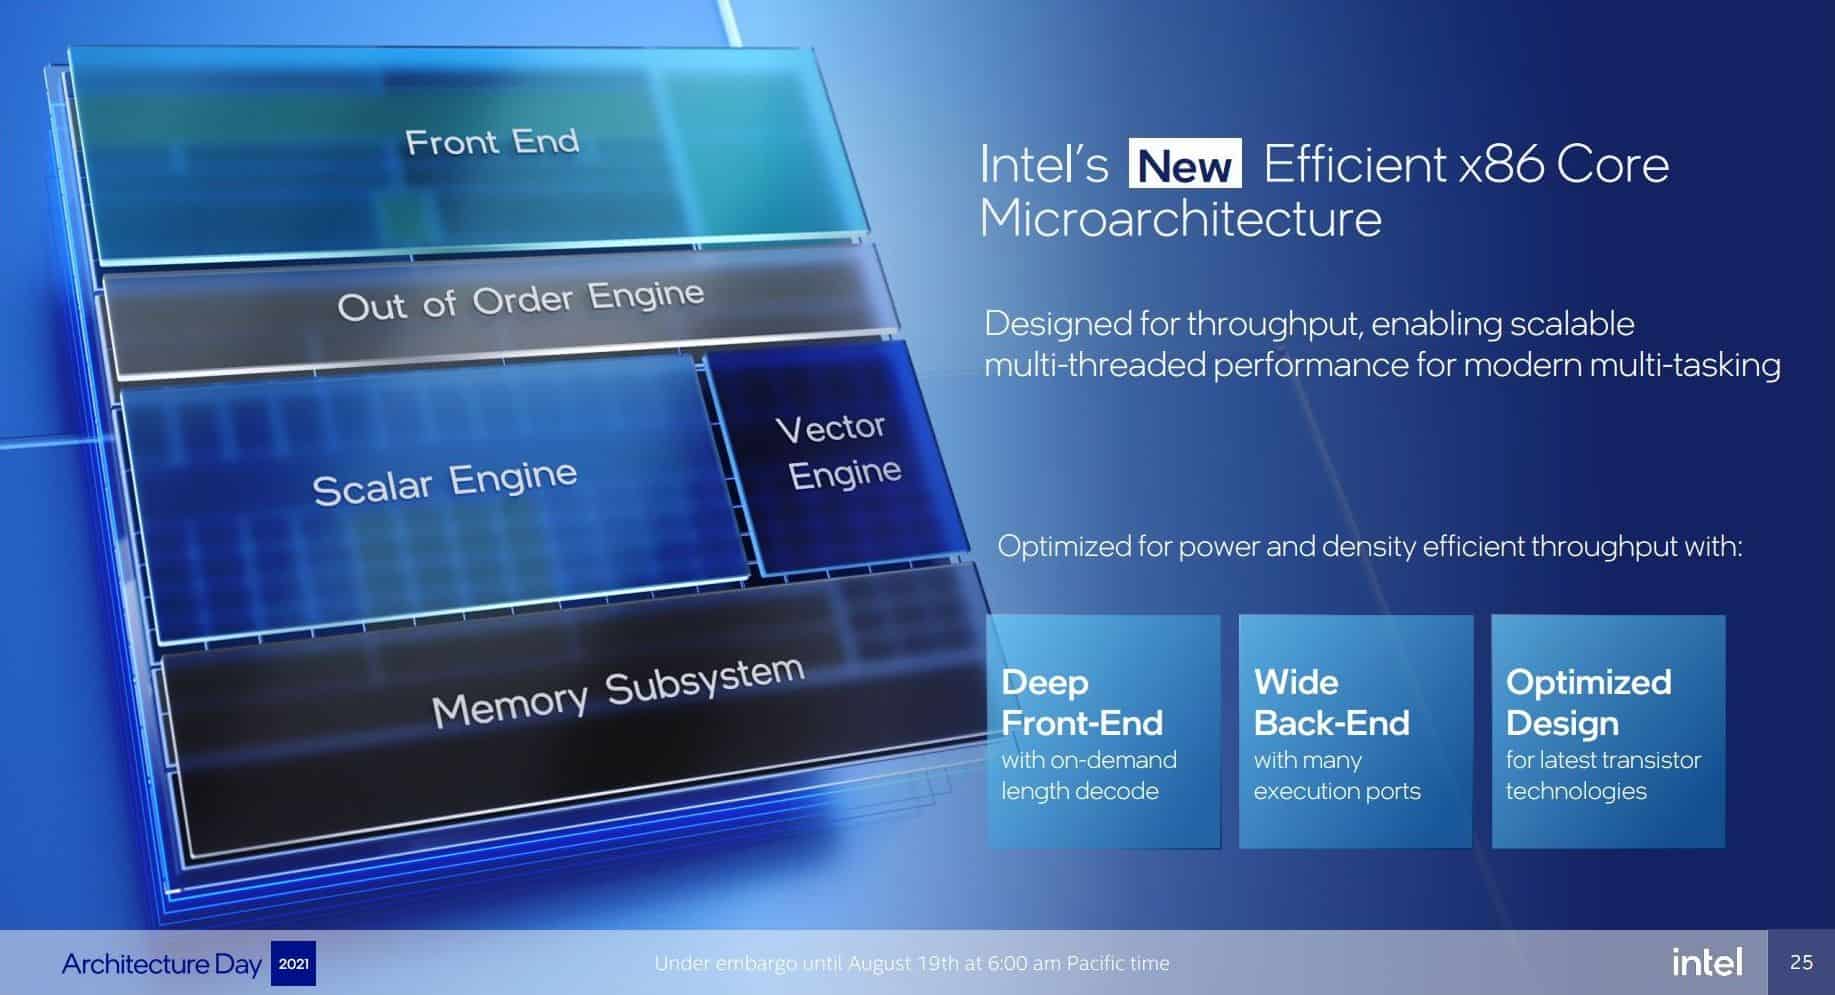 Intel's Efficient Core Microarchitecture, with a "Deep Front-End", "Wide Back-End" and an "Optimized Design"